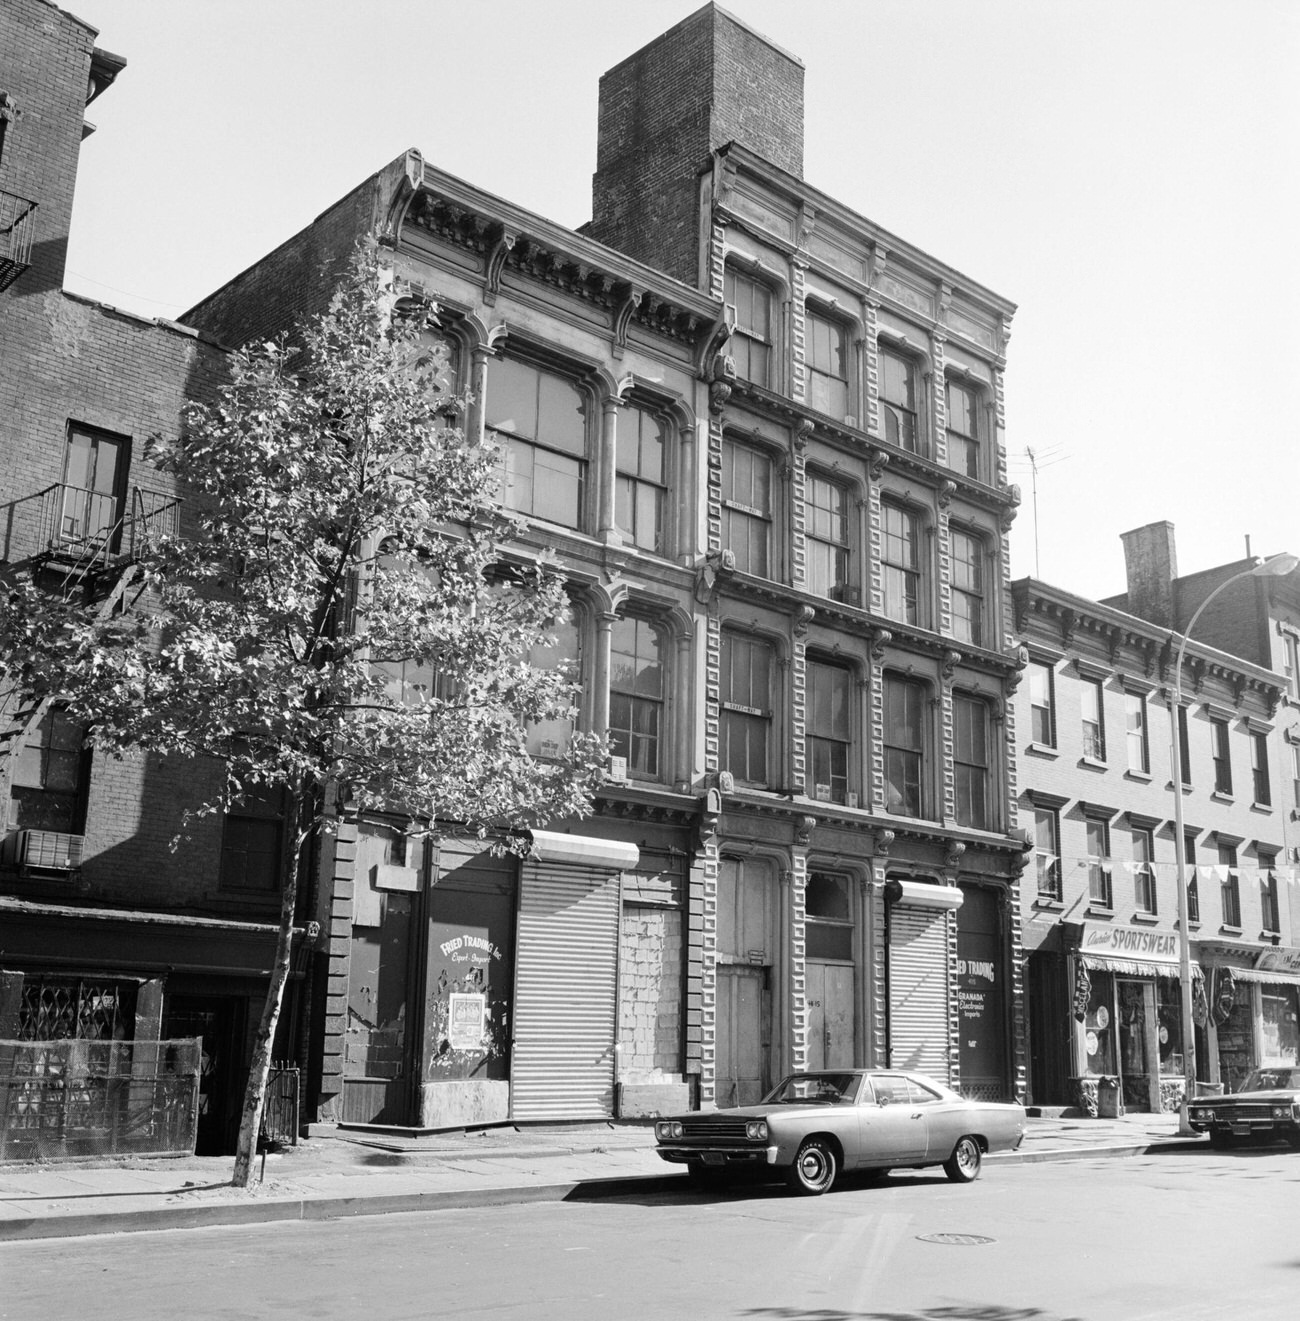 Fried Trading Building, Possibly At 411-415 Bedford Avenue, Brooklyn, 1975.